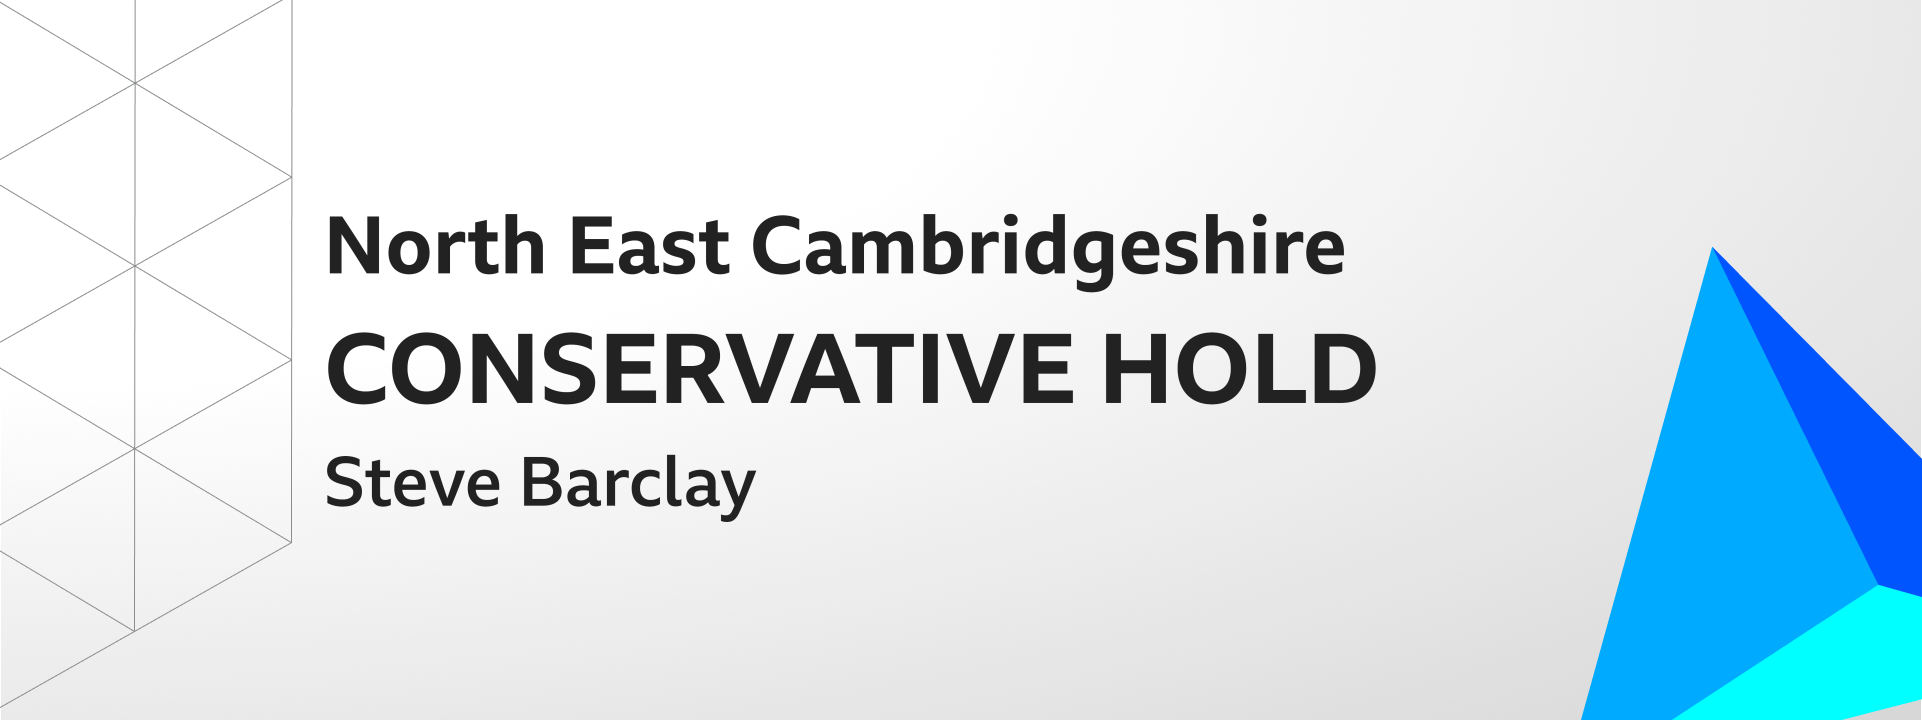 Graphic showing Conservatives hold North East Cambridgeshire. The winning candidate was Steve Barclay.